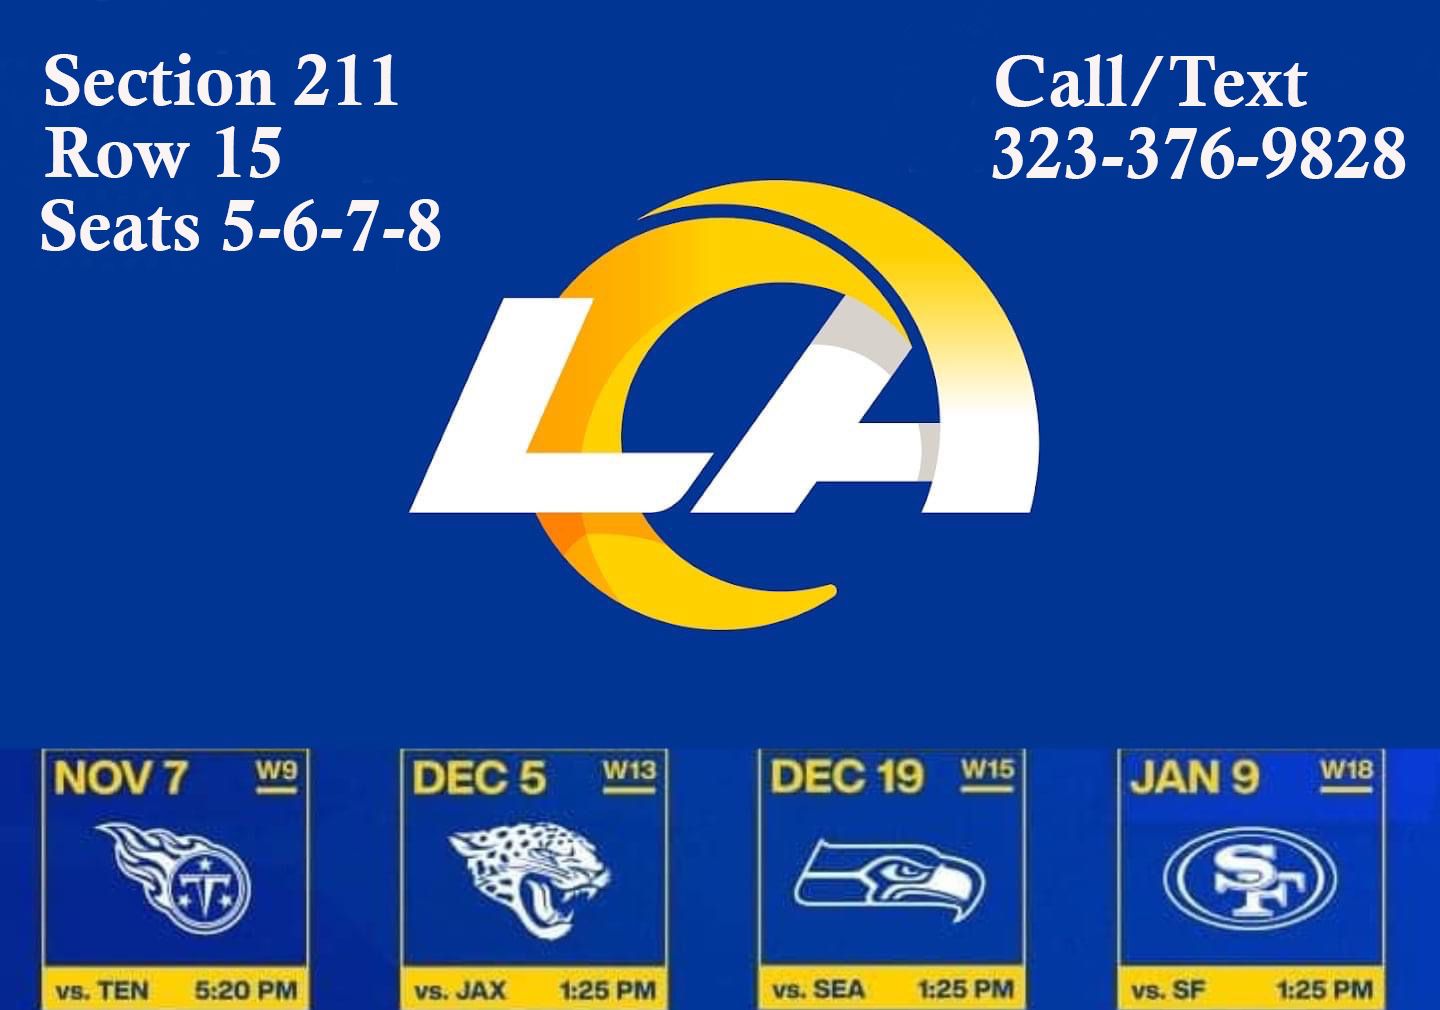 RAMS HOME GAMES AVAILABLE 